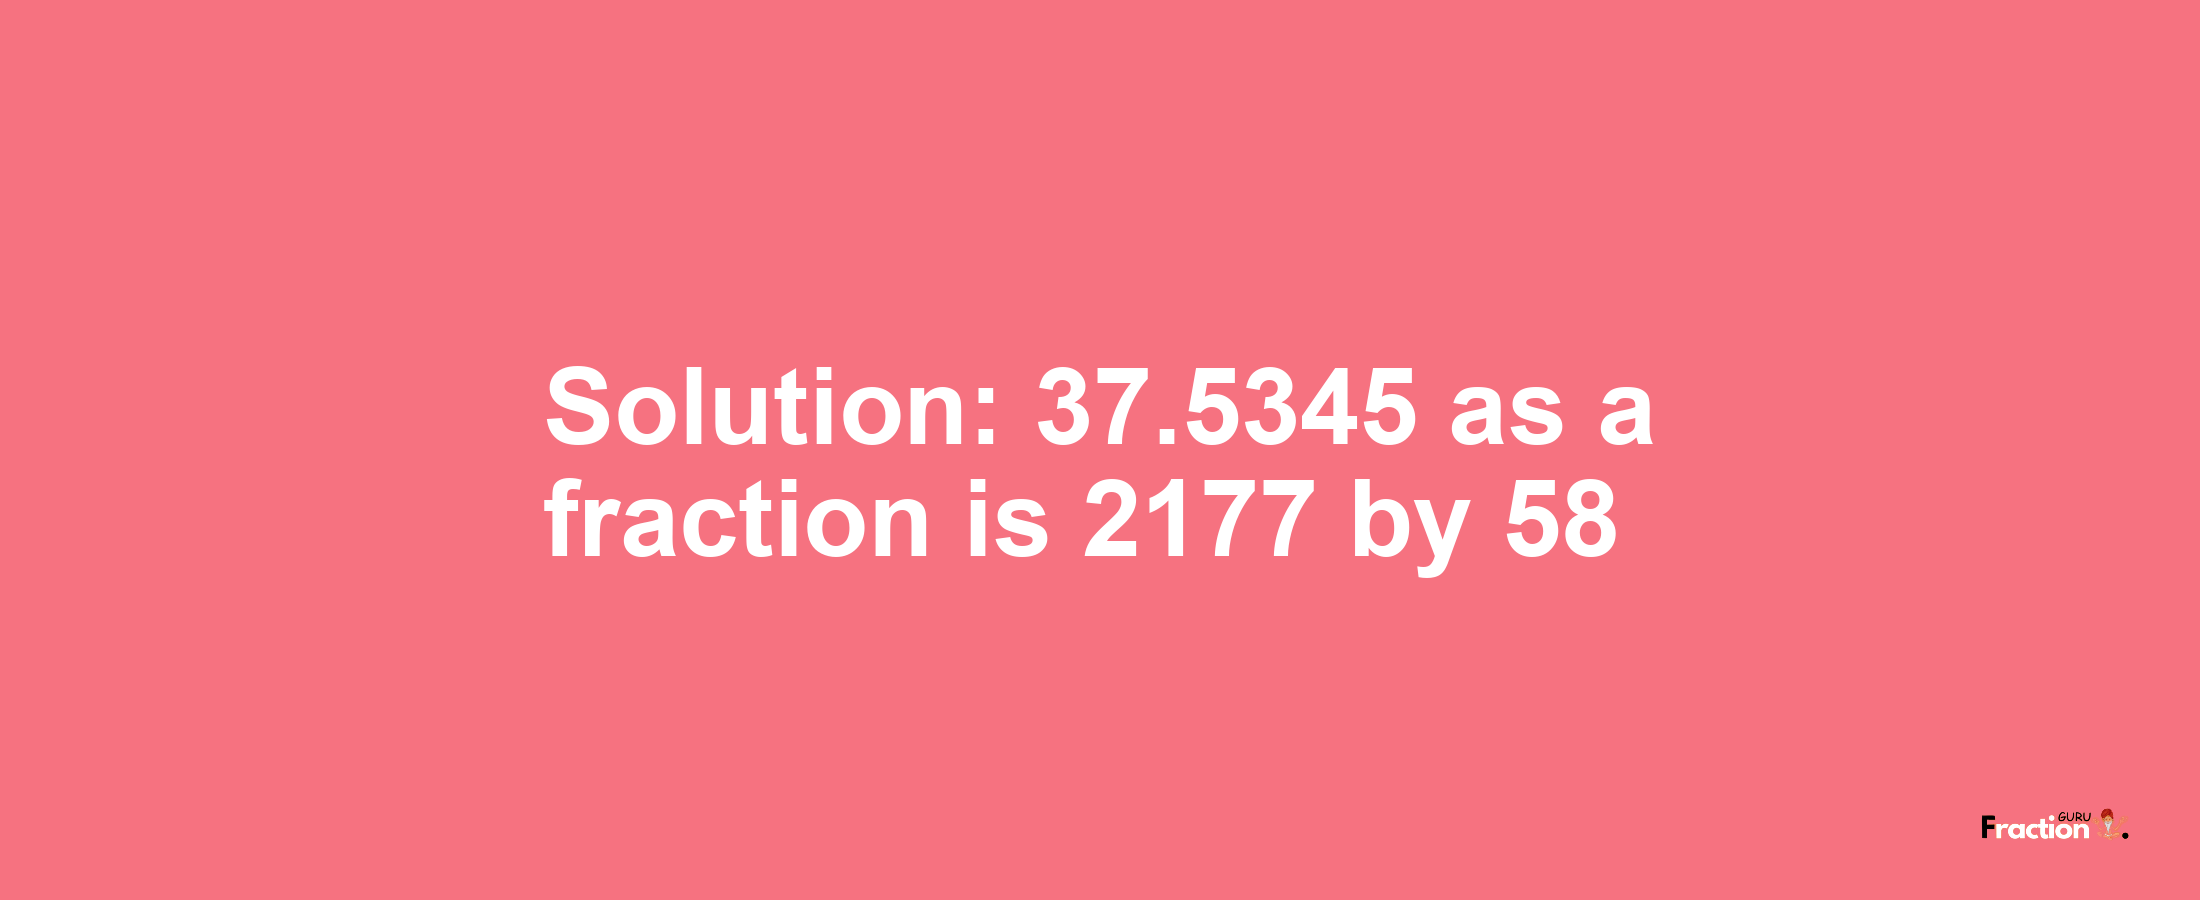 Solution:37.5345 as a fraction is 2177/58